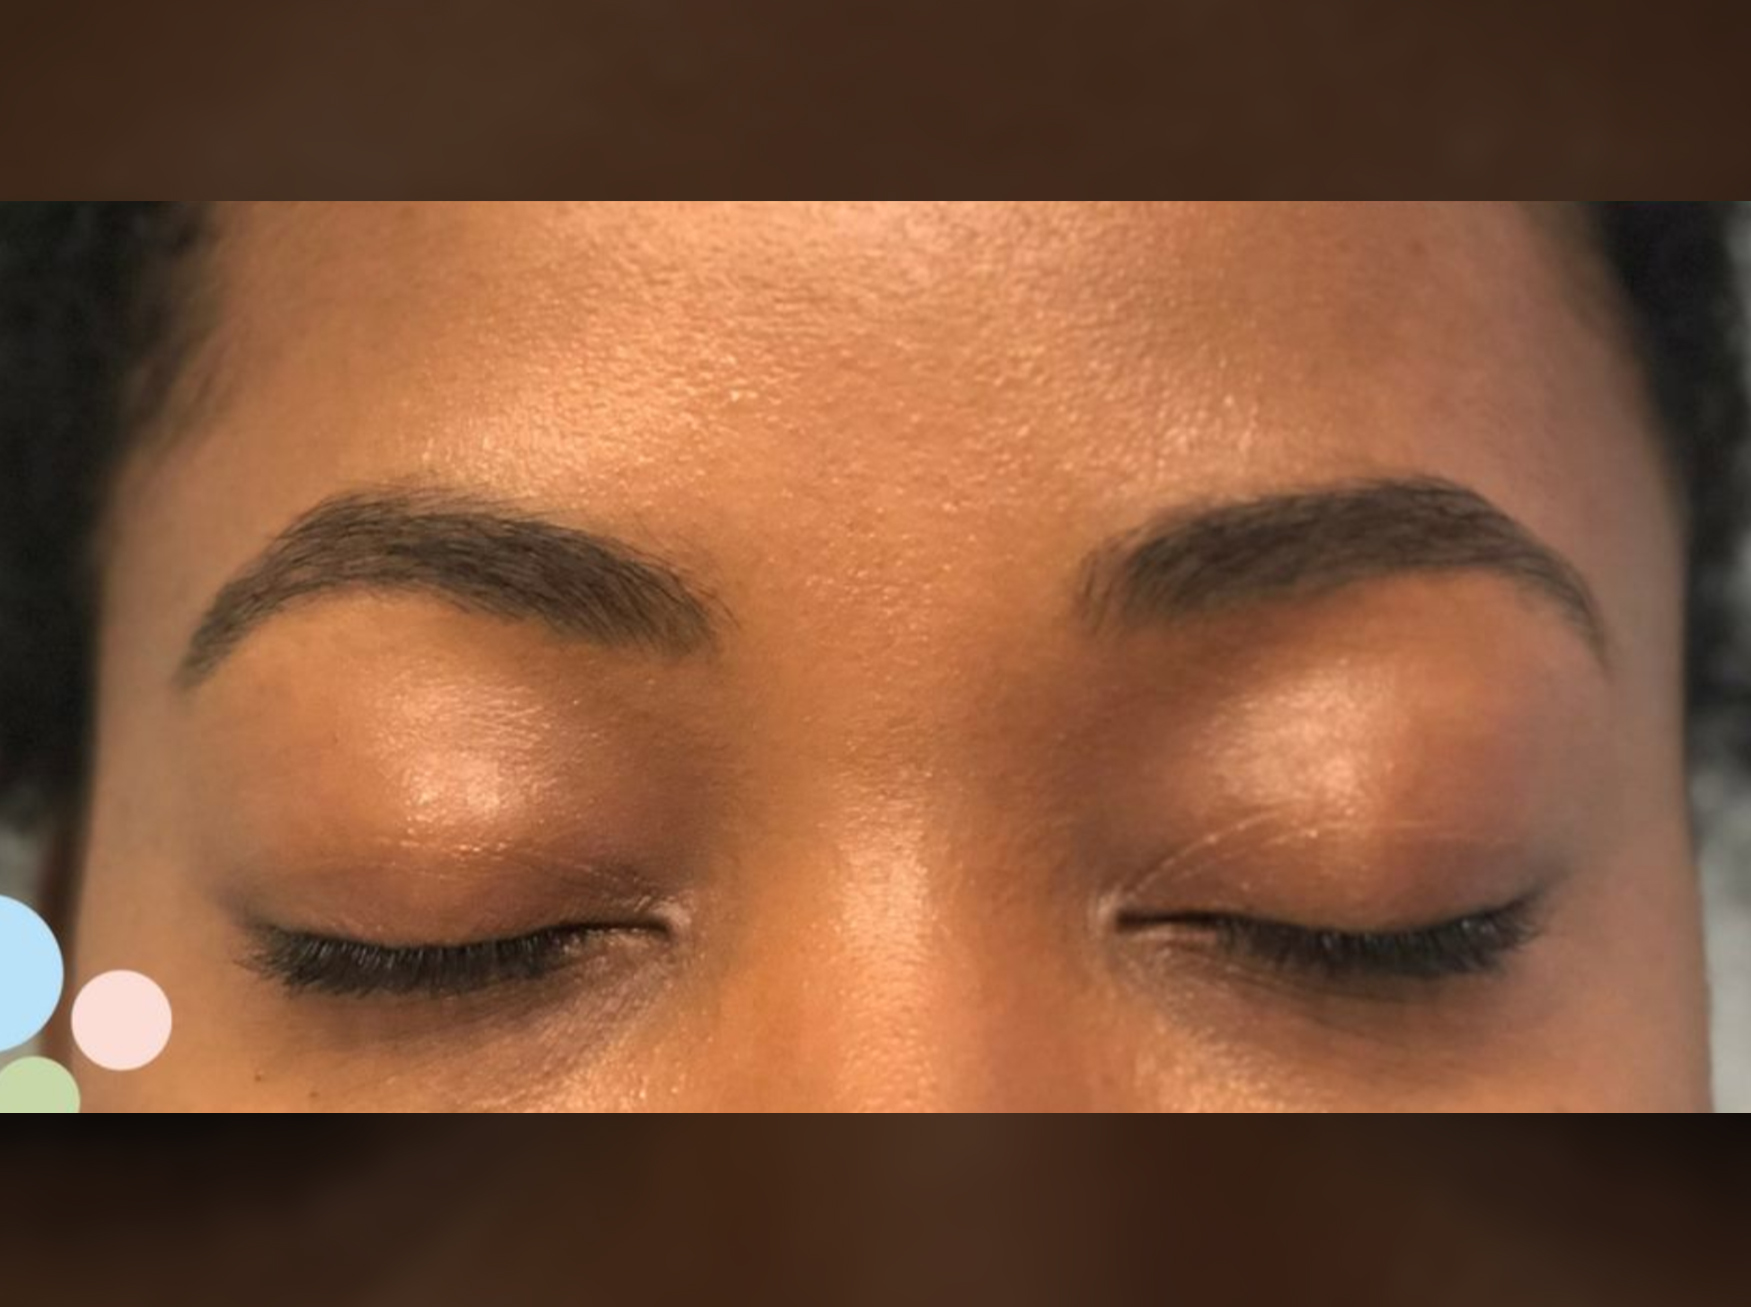 A persons brow ridge After Sugaring